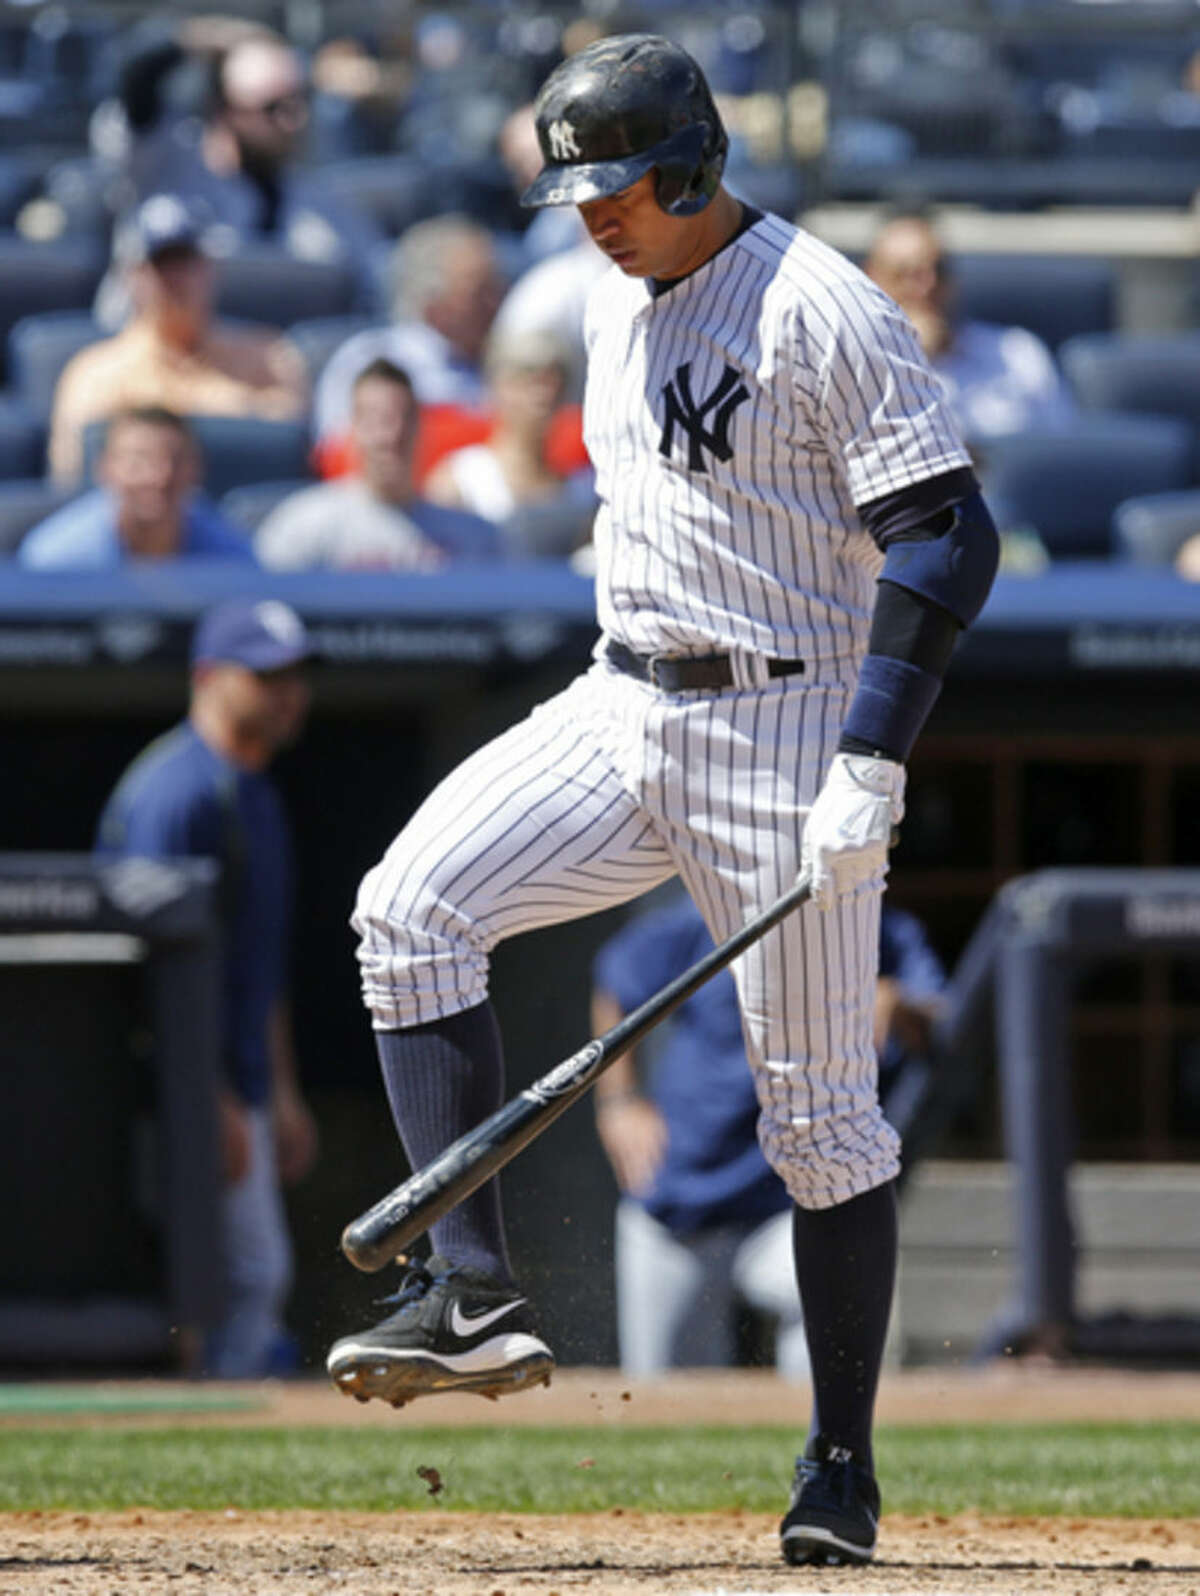 New York Yankees designated hitter Alex Rodriguez taps his bat on his shoe after striking out in the fourth inning of a baseball game at Yankee Stadium in New York, Wednesday, April 29, 2015. (AP Photo/Kathy Willens)